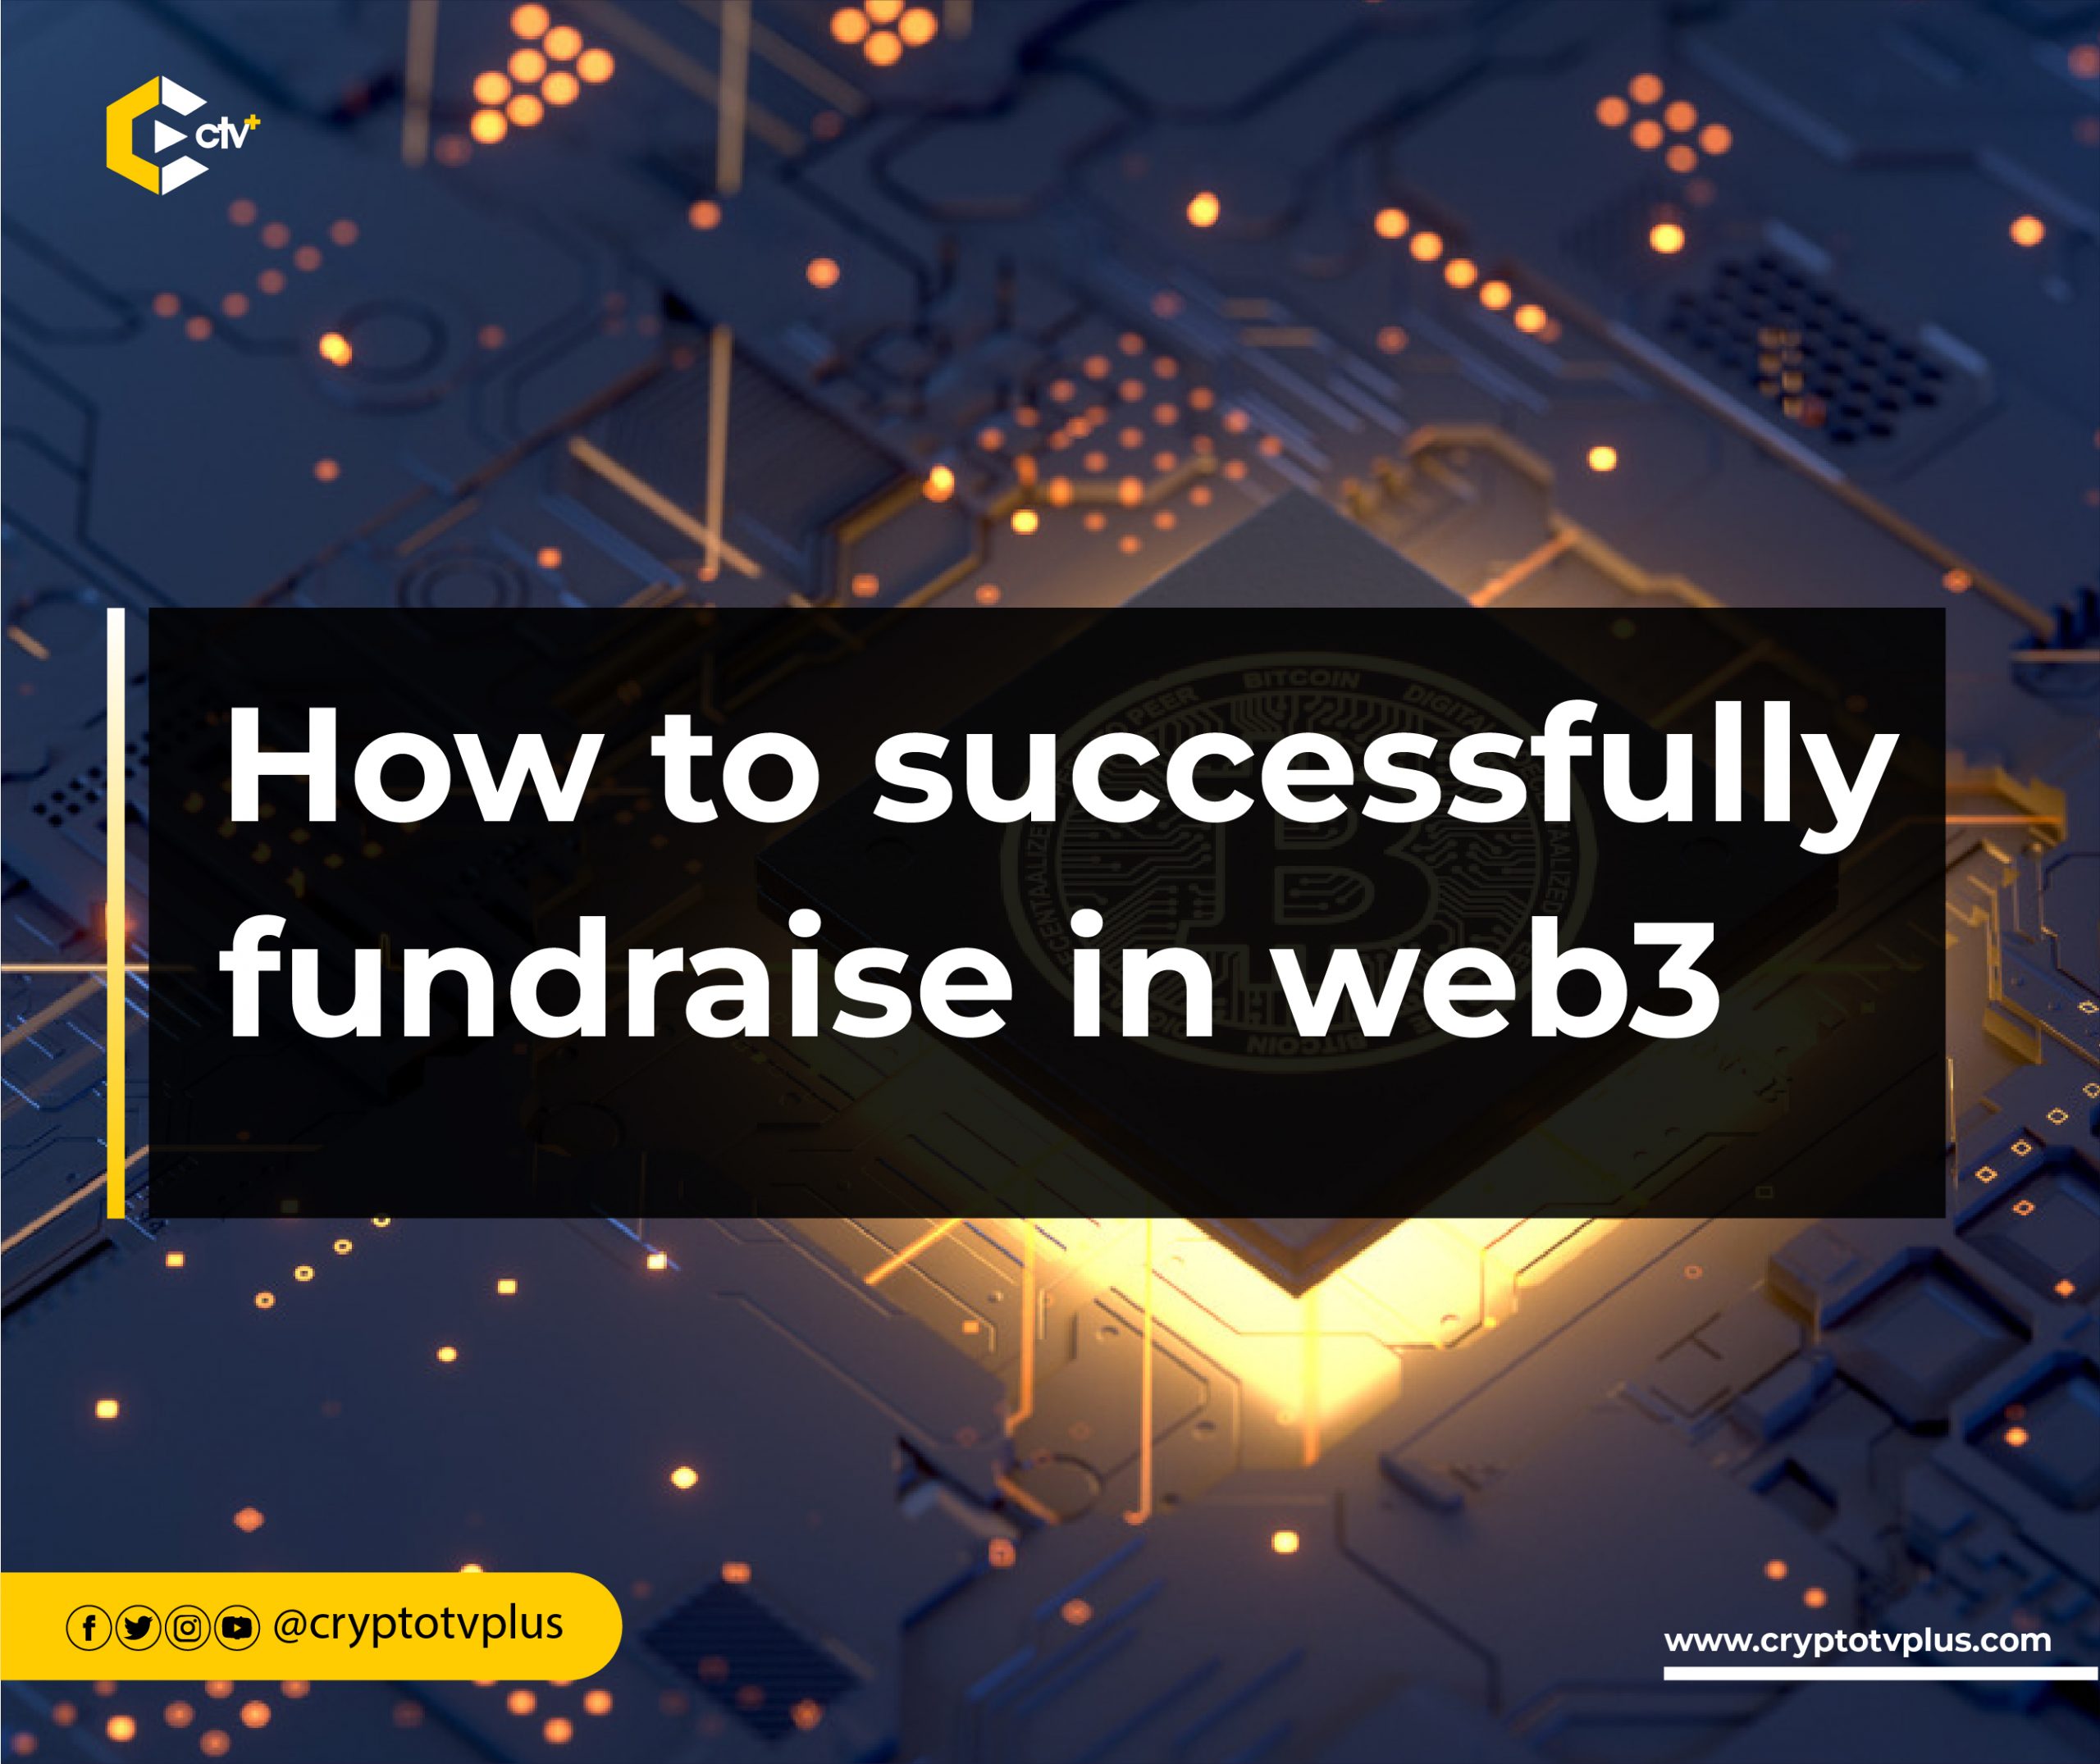 How to fundraise in web3